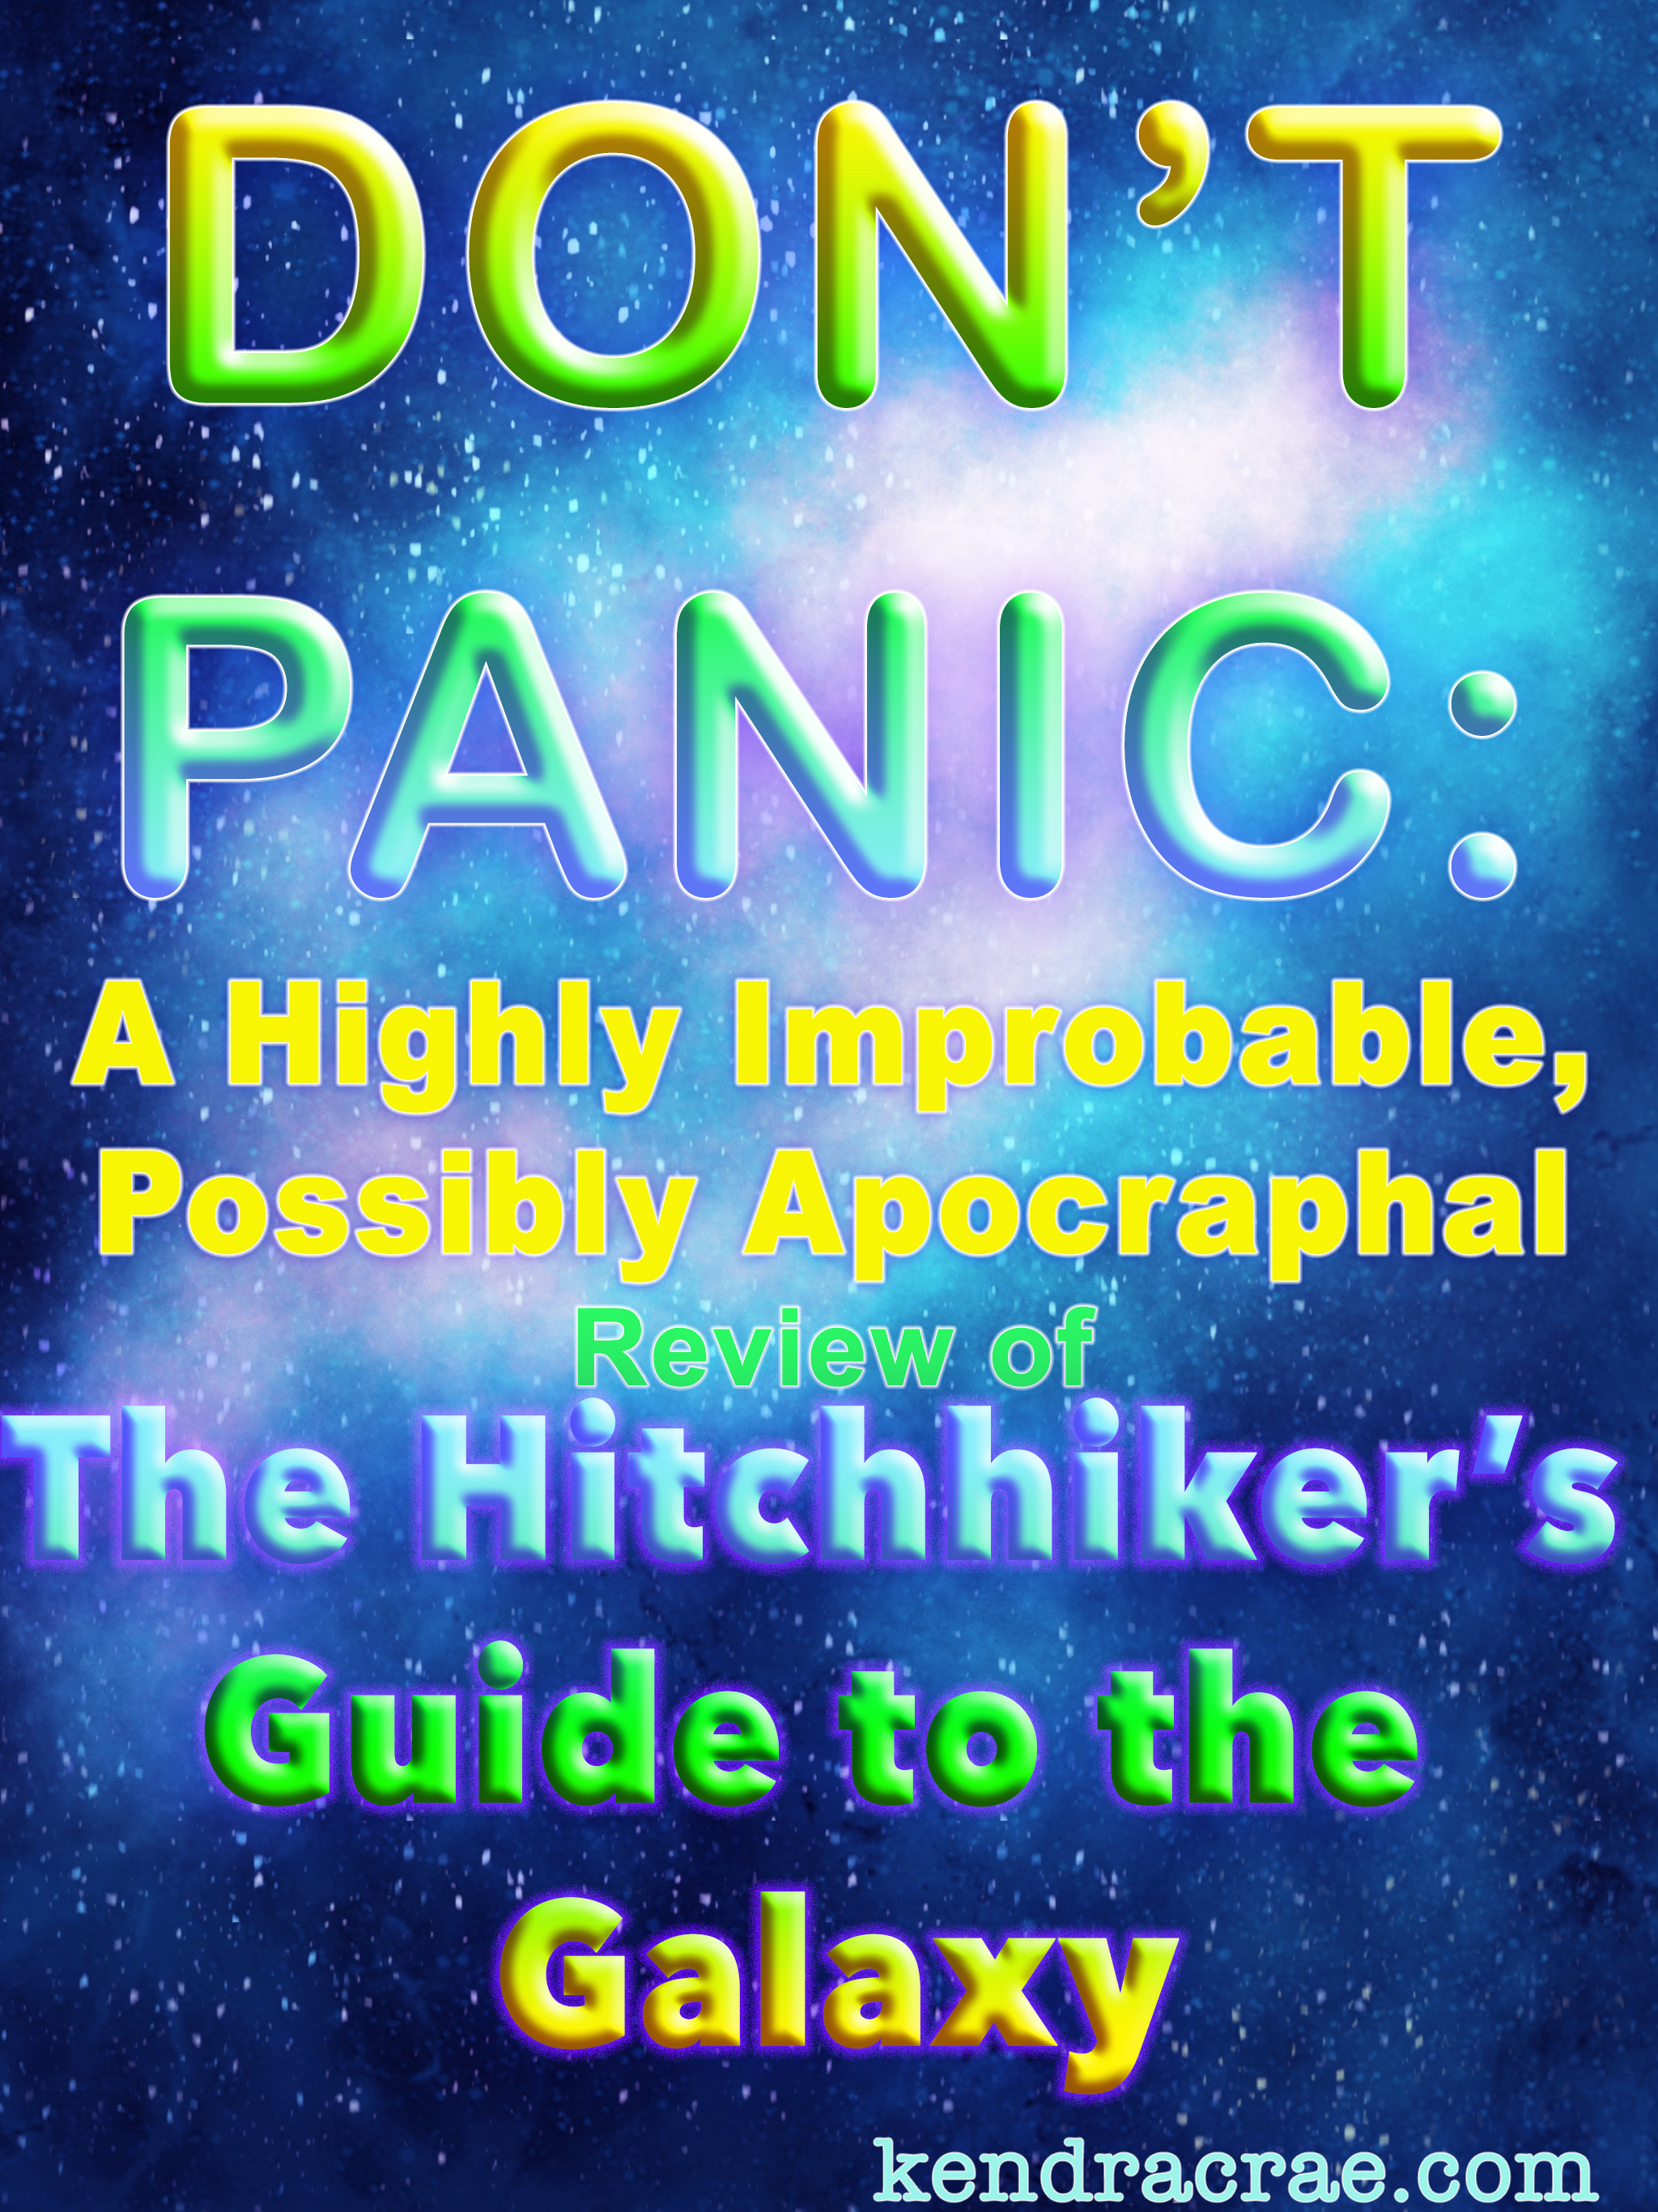 HHGG - Hitch Hikers Guide to the Galaxy